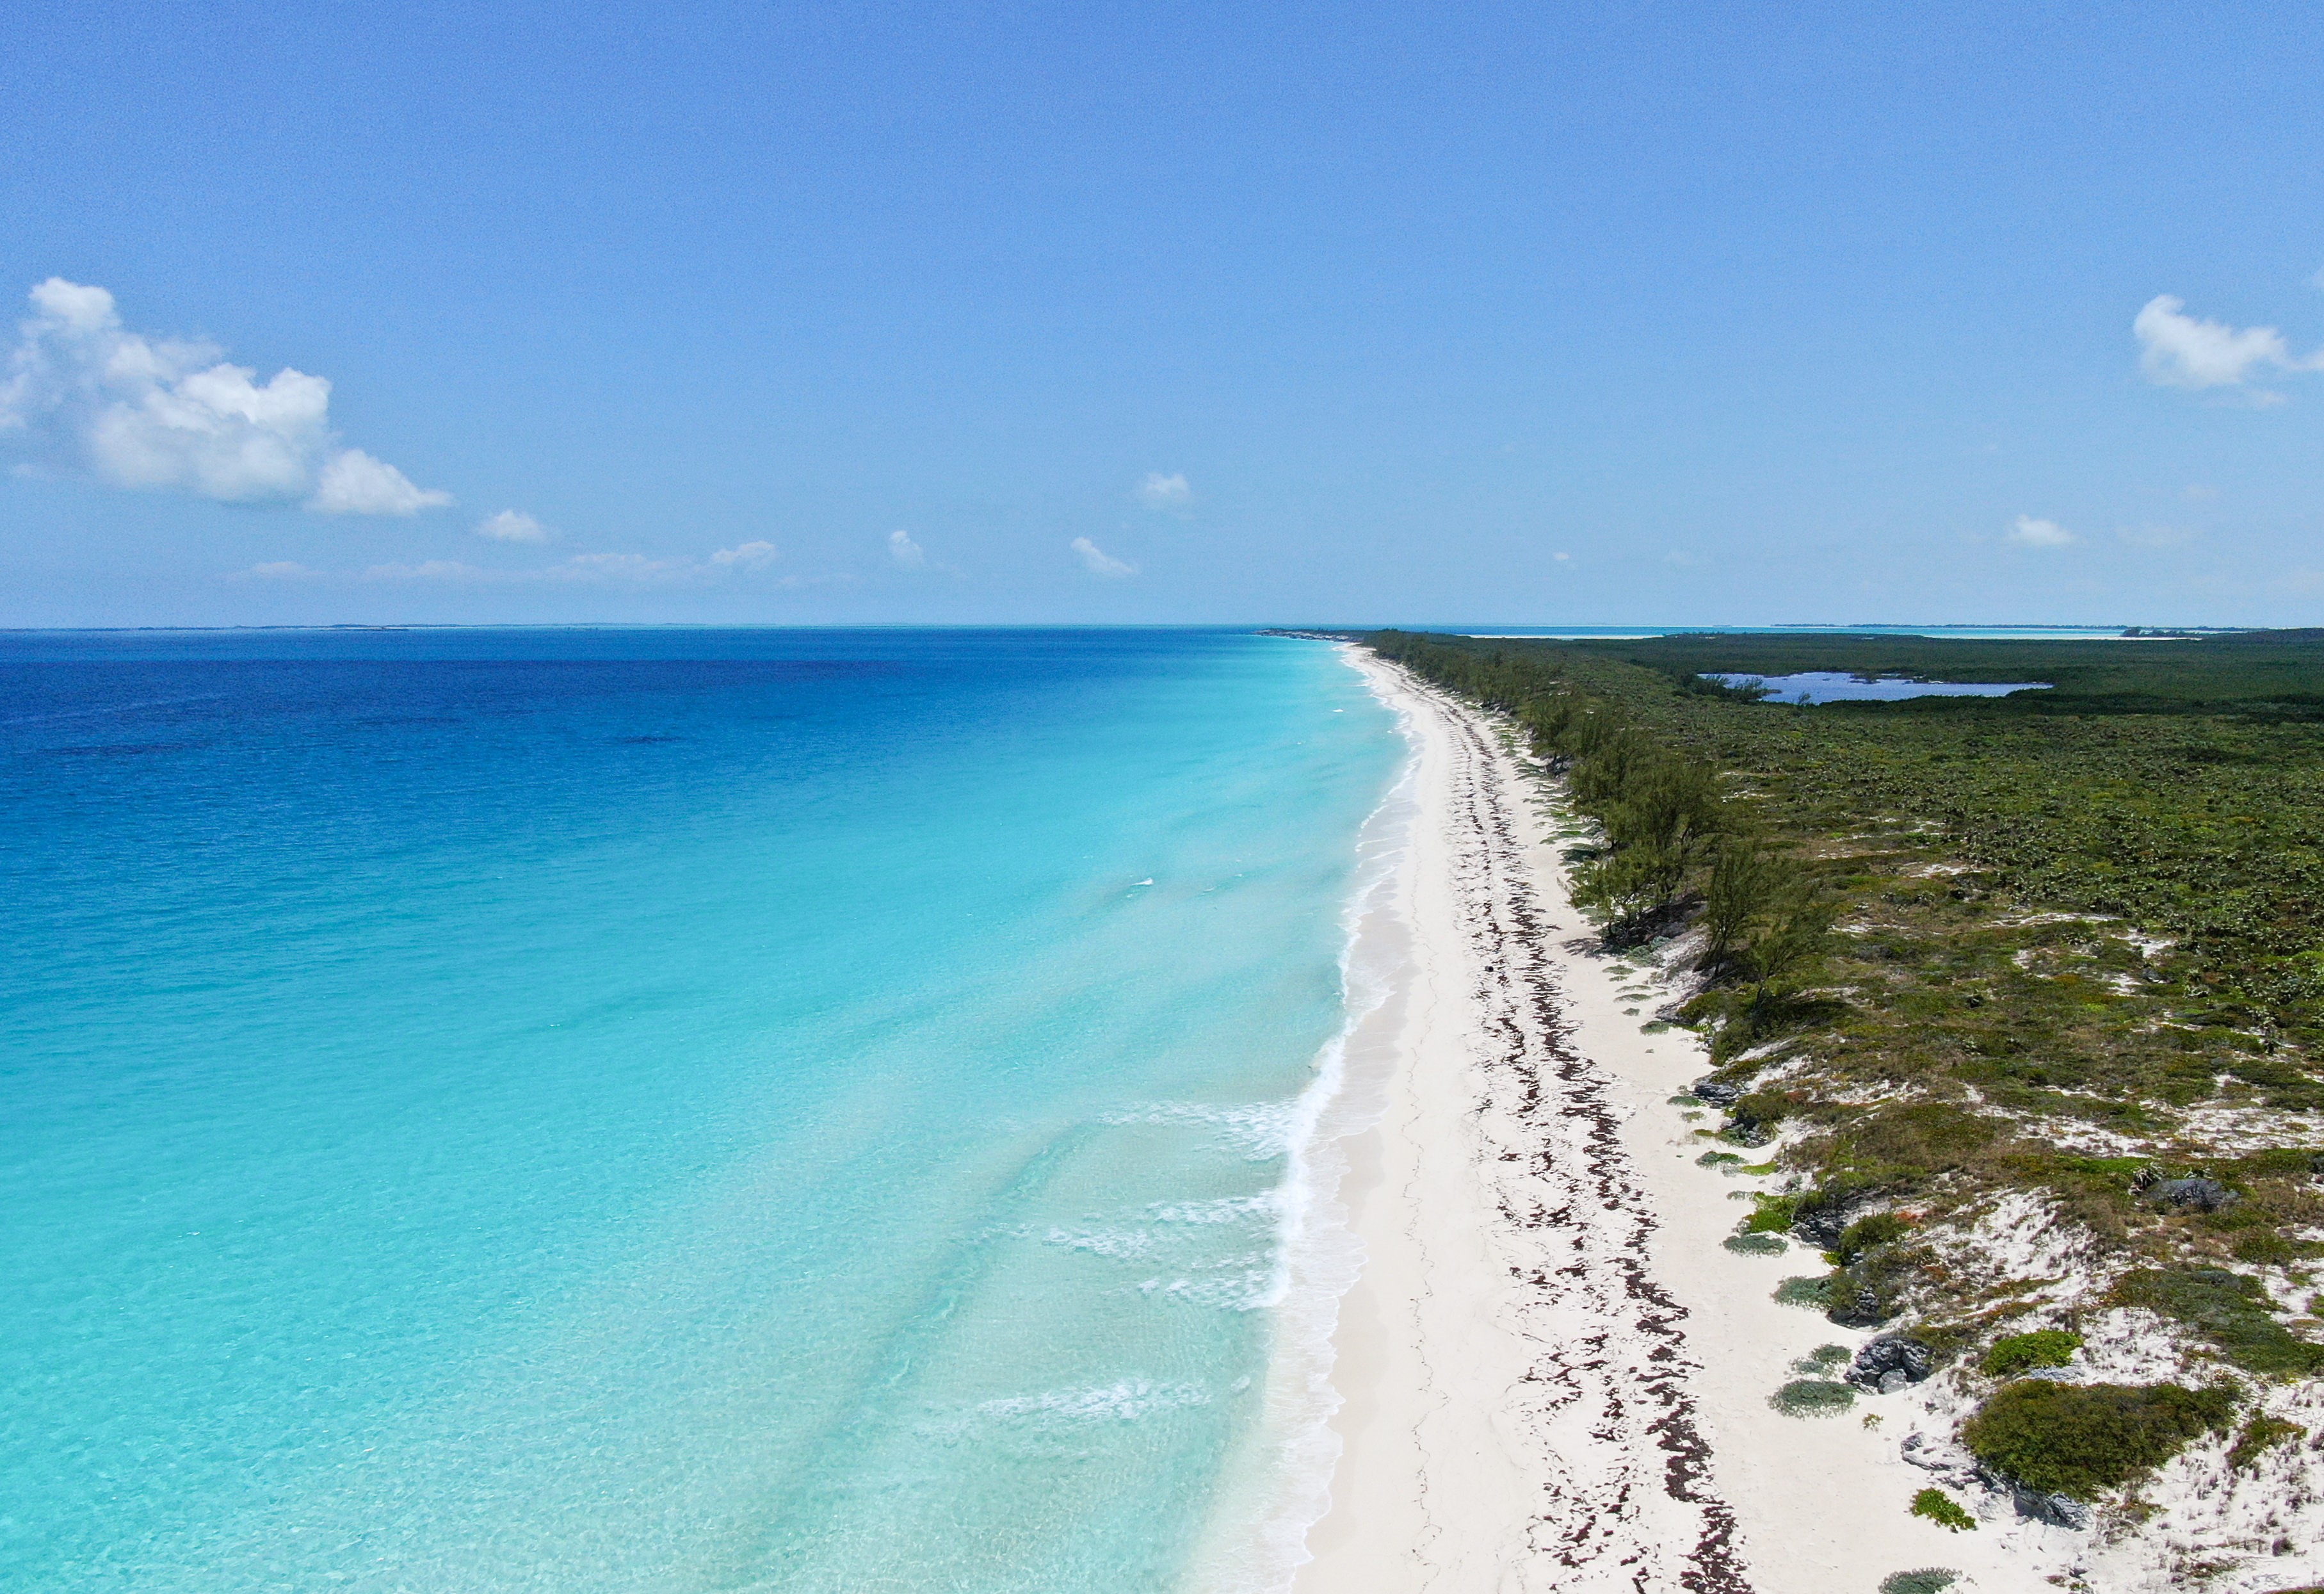 Haines Cay - The Berry Islands, Bahamas , Caribbean - Private Islands for  Sale